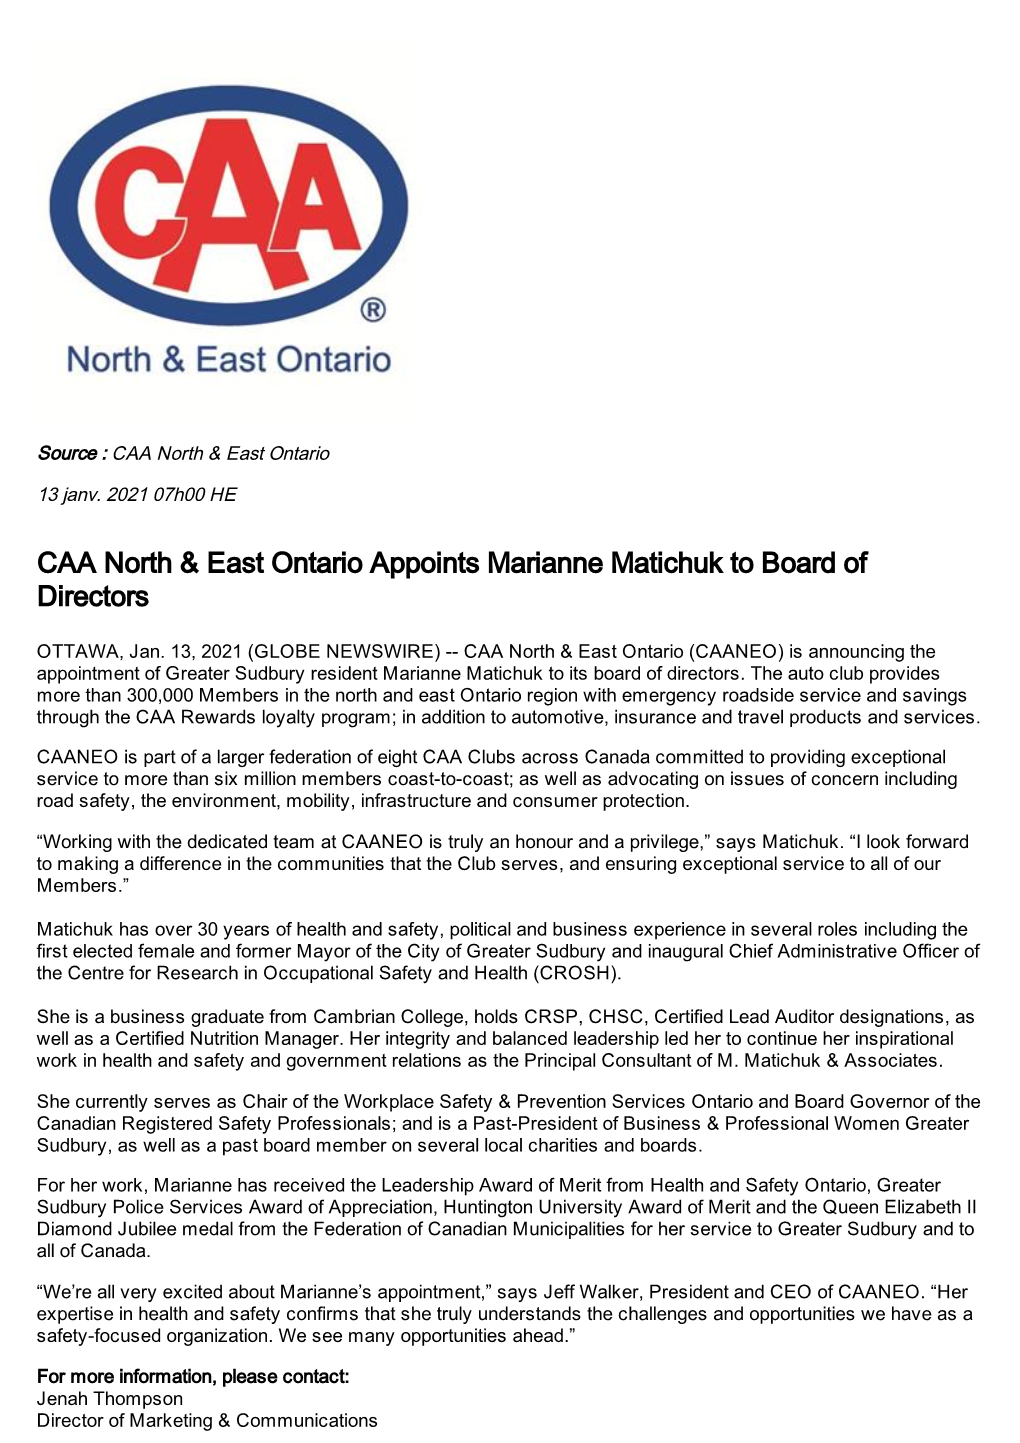 CAA North & East Ontario Appoints Marianne Matichuk to Board Of